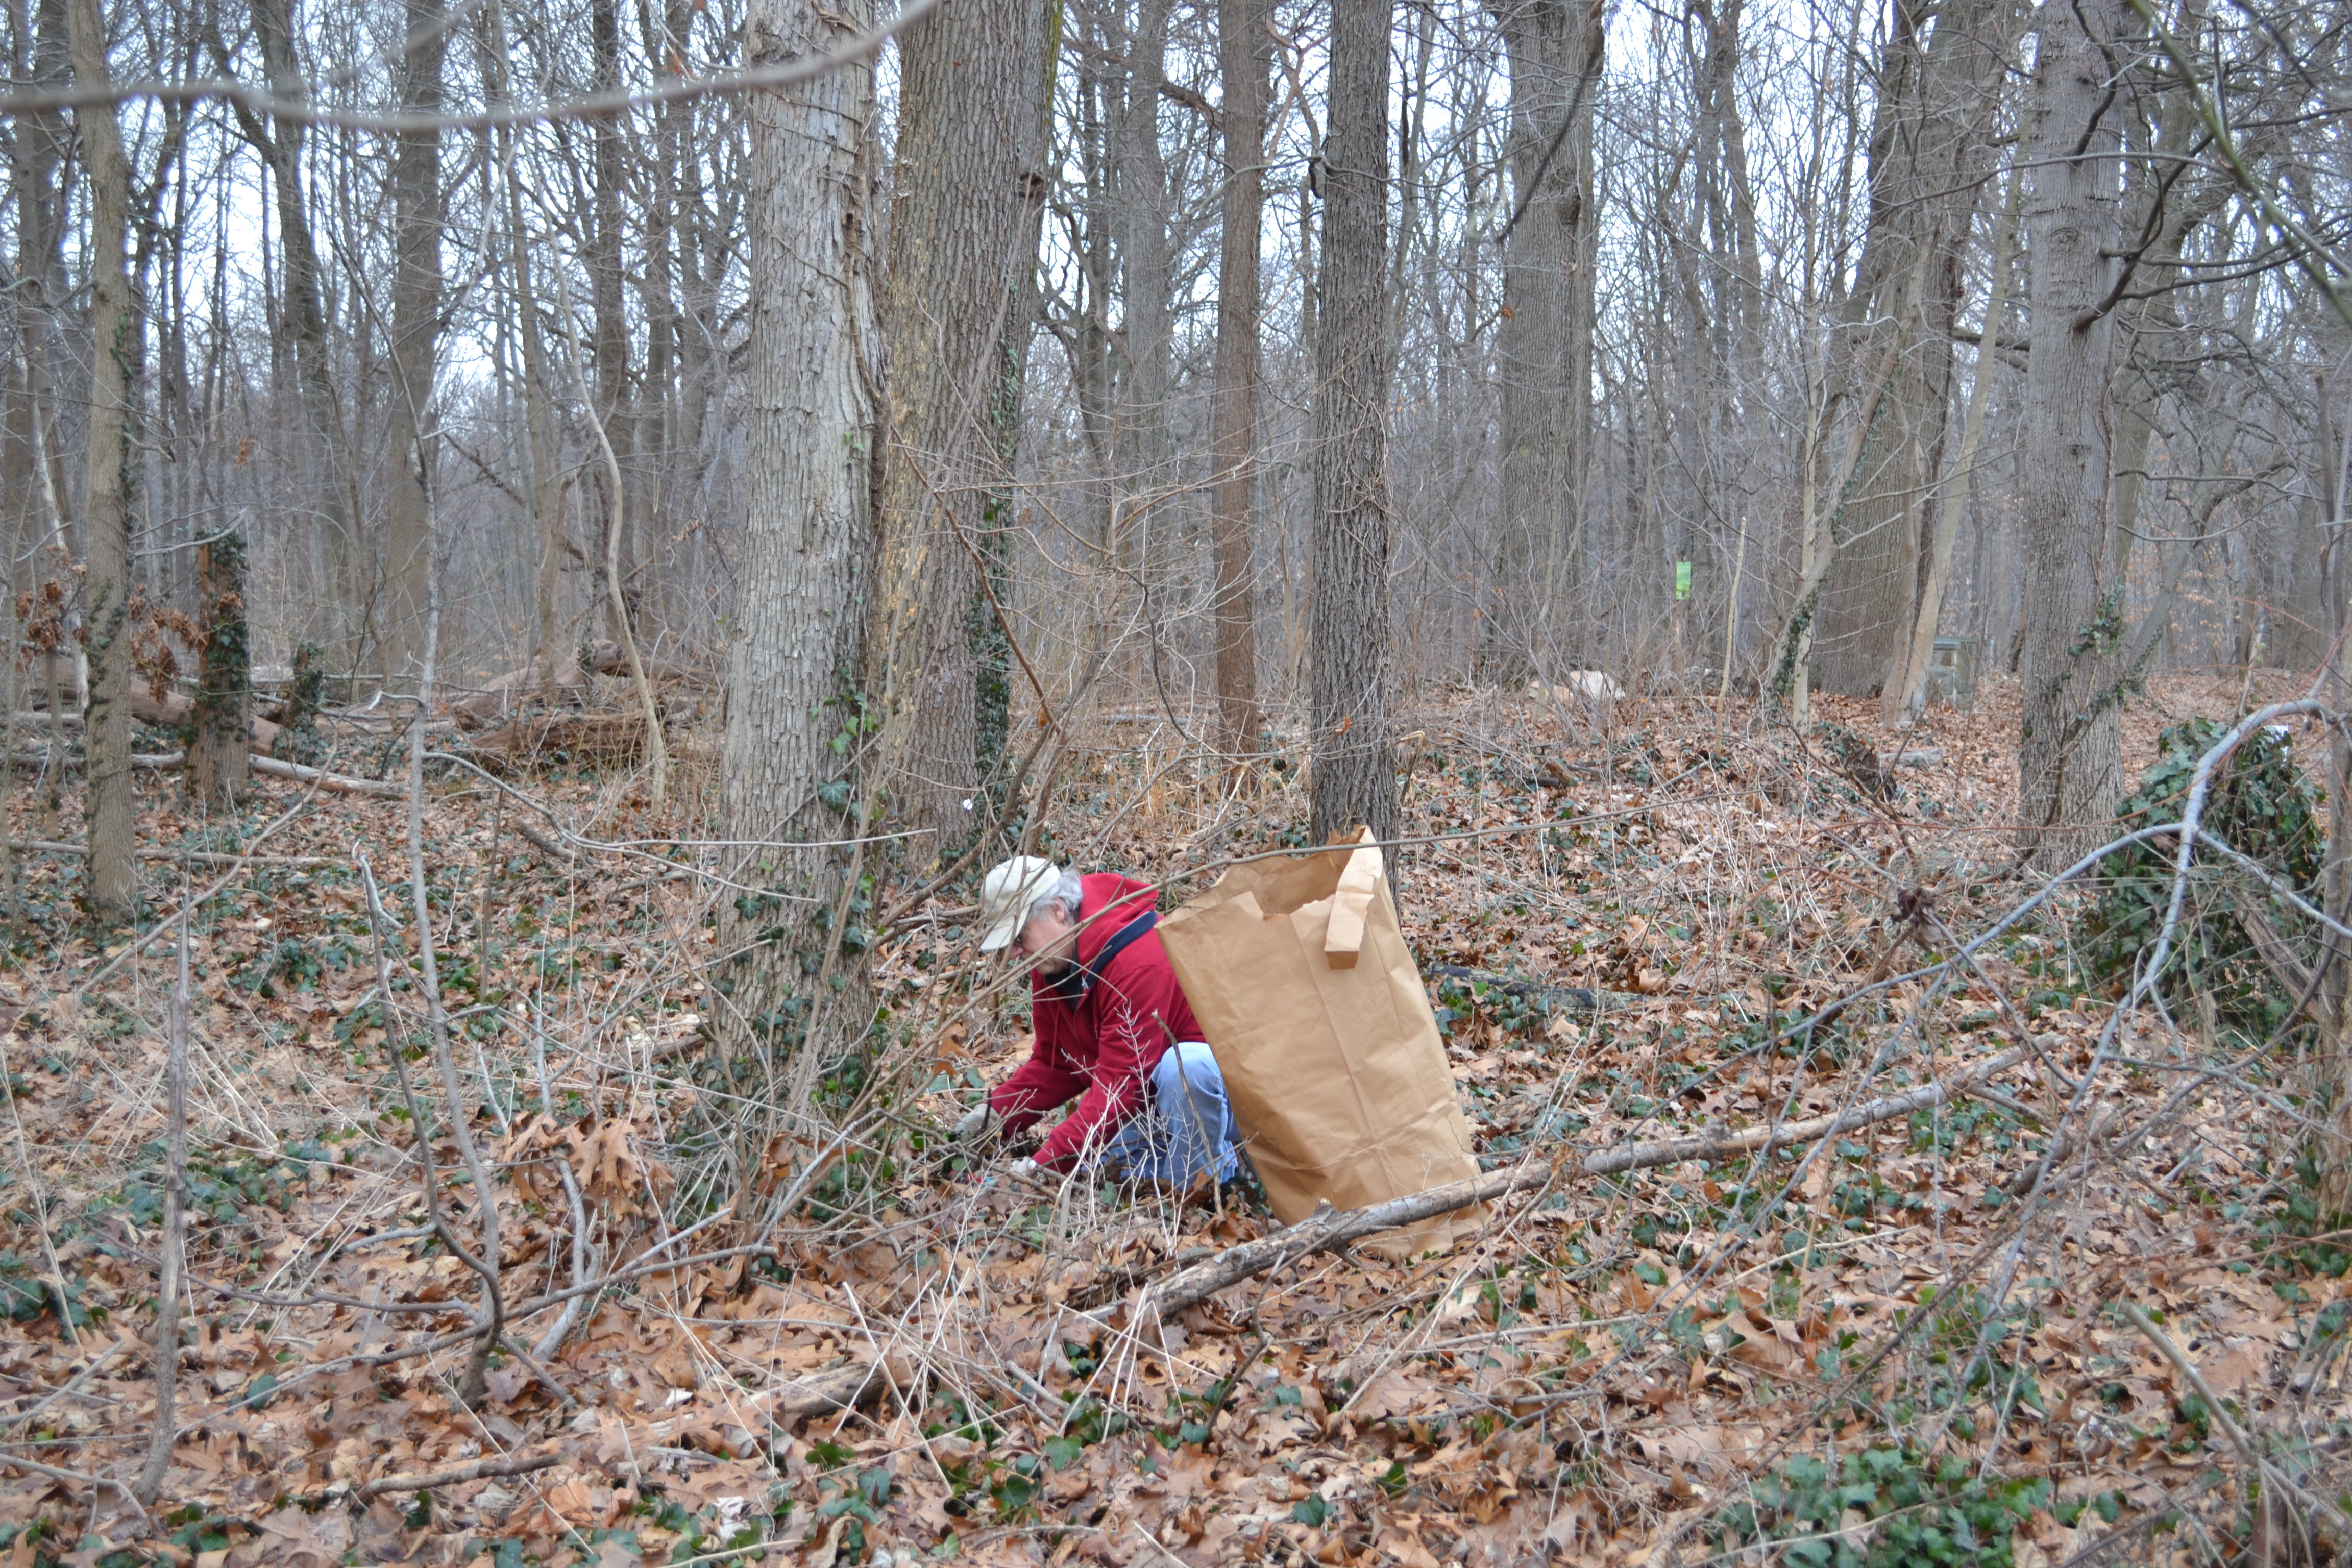 Friends of Carpenter's Woods cleanup